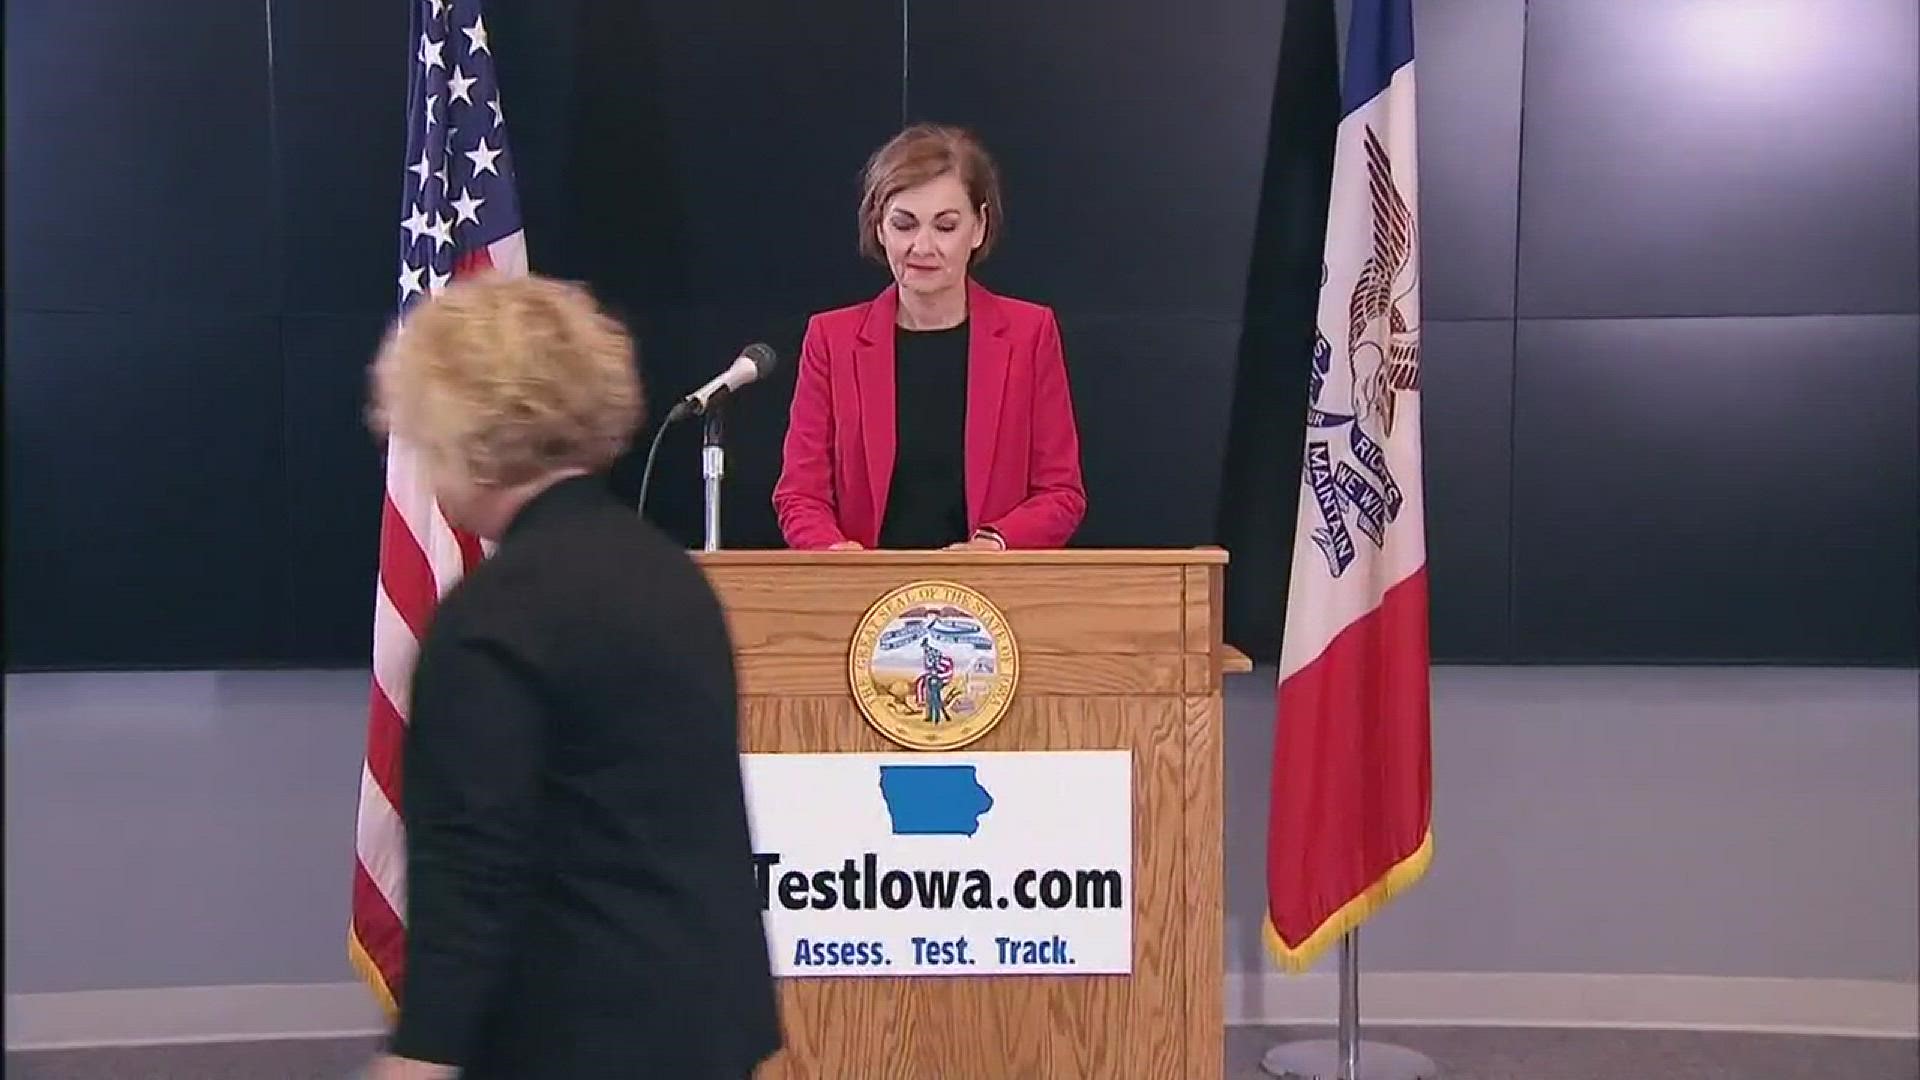 Gov. Kim Reynolds provides updates on reopening businesses as well as allocating money for a relief program for those facing eviction, foreclosure from the pandemic.